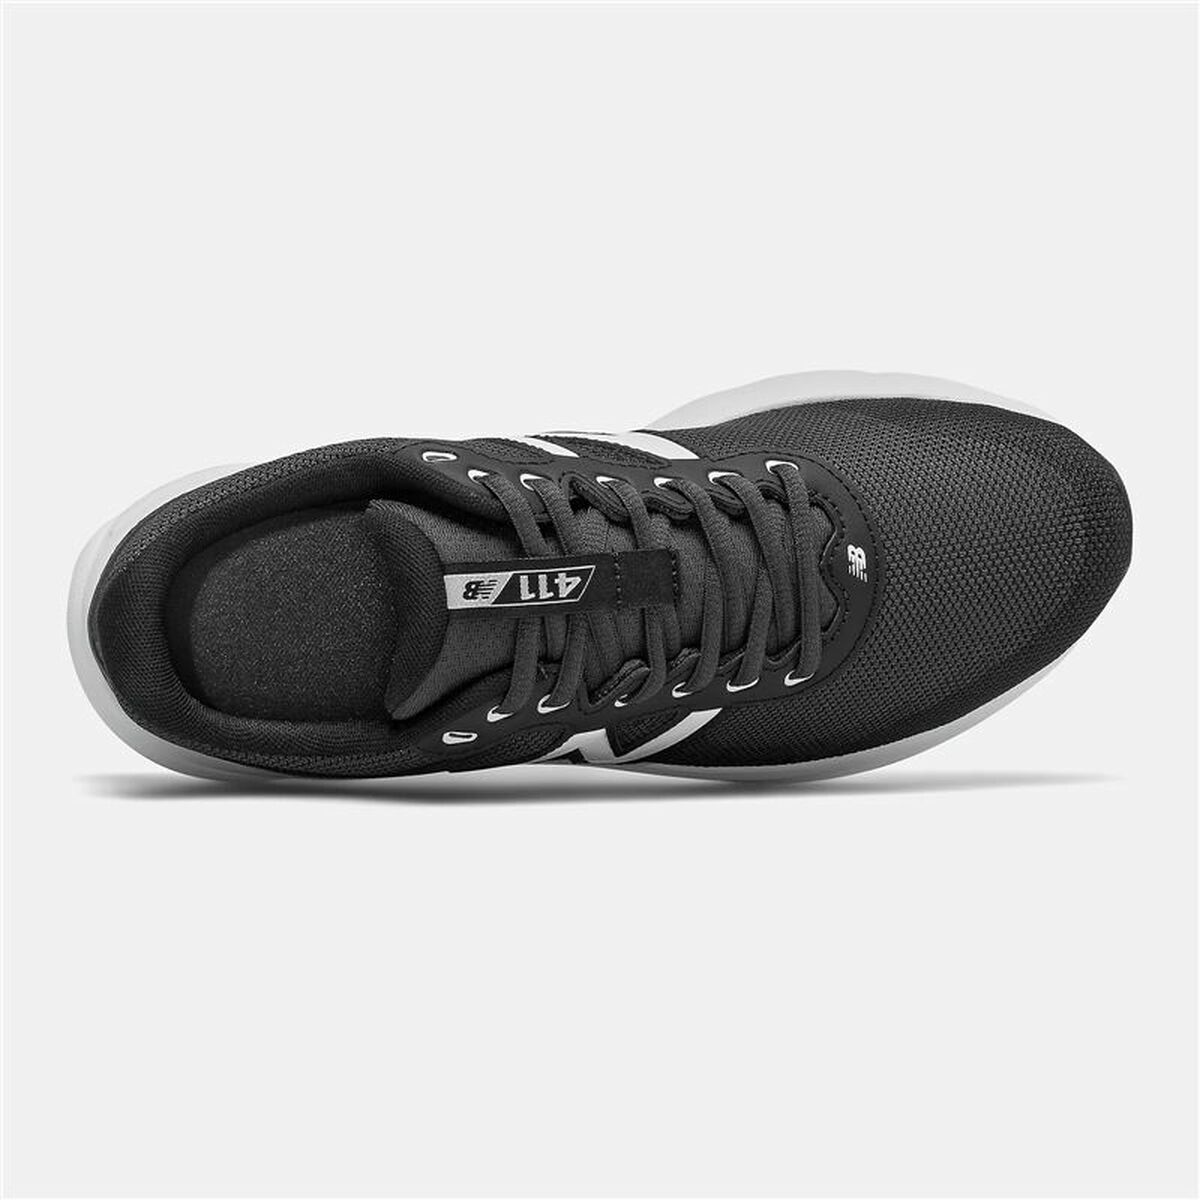 Running Shoes for Adults New Balance 411 v2 Black